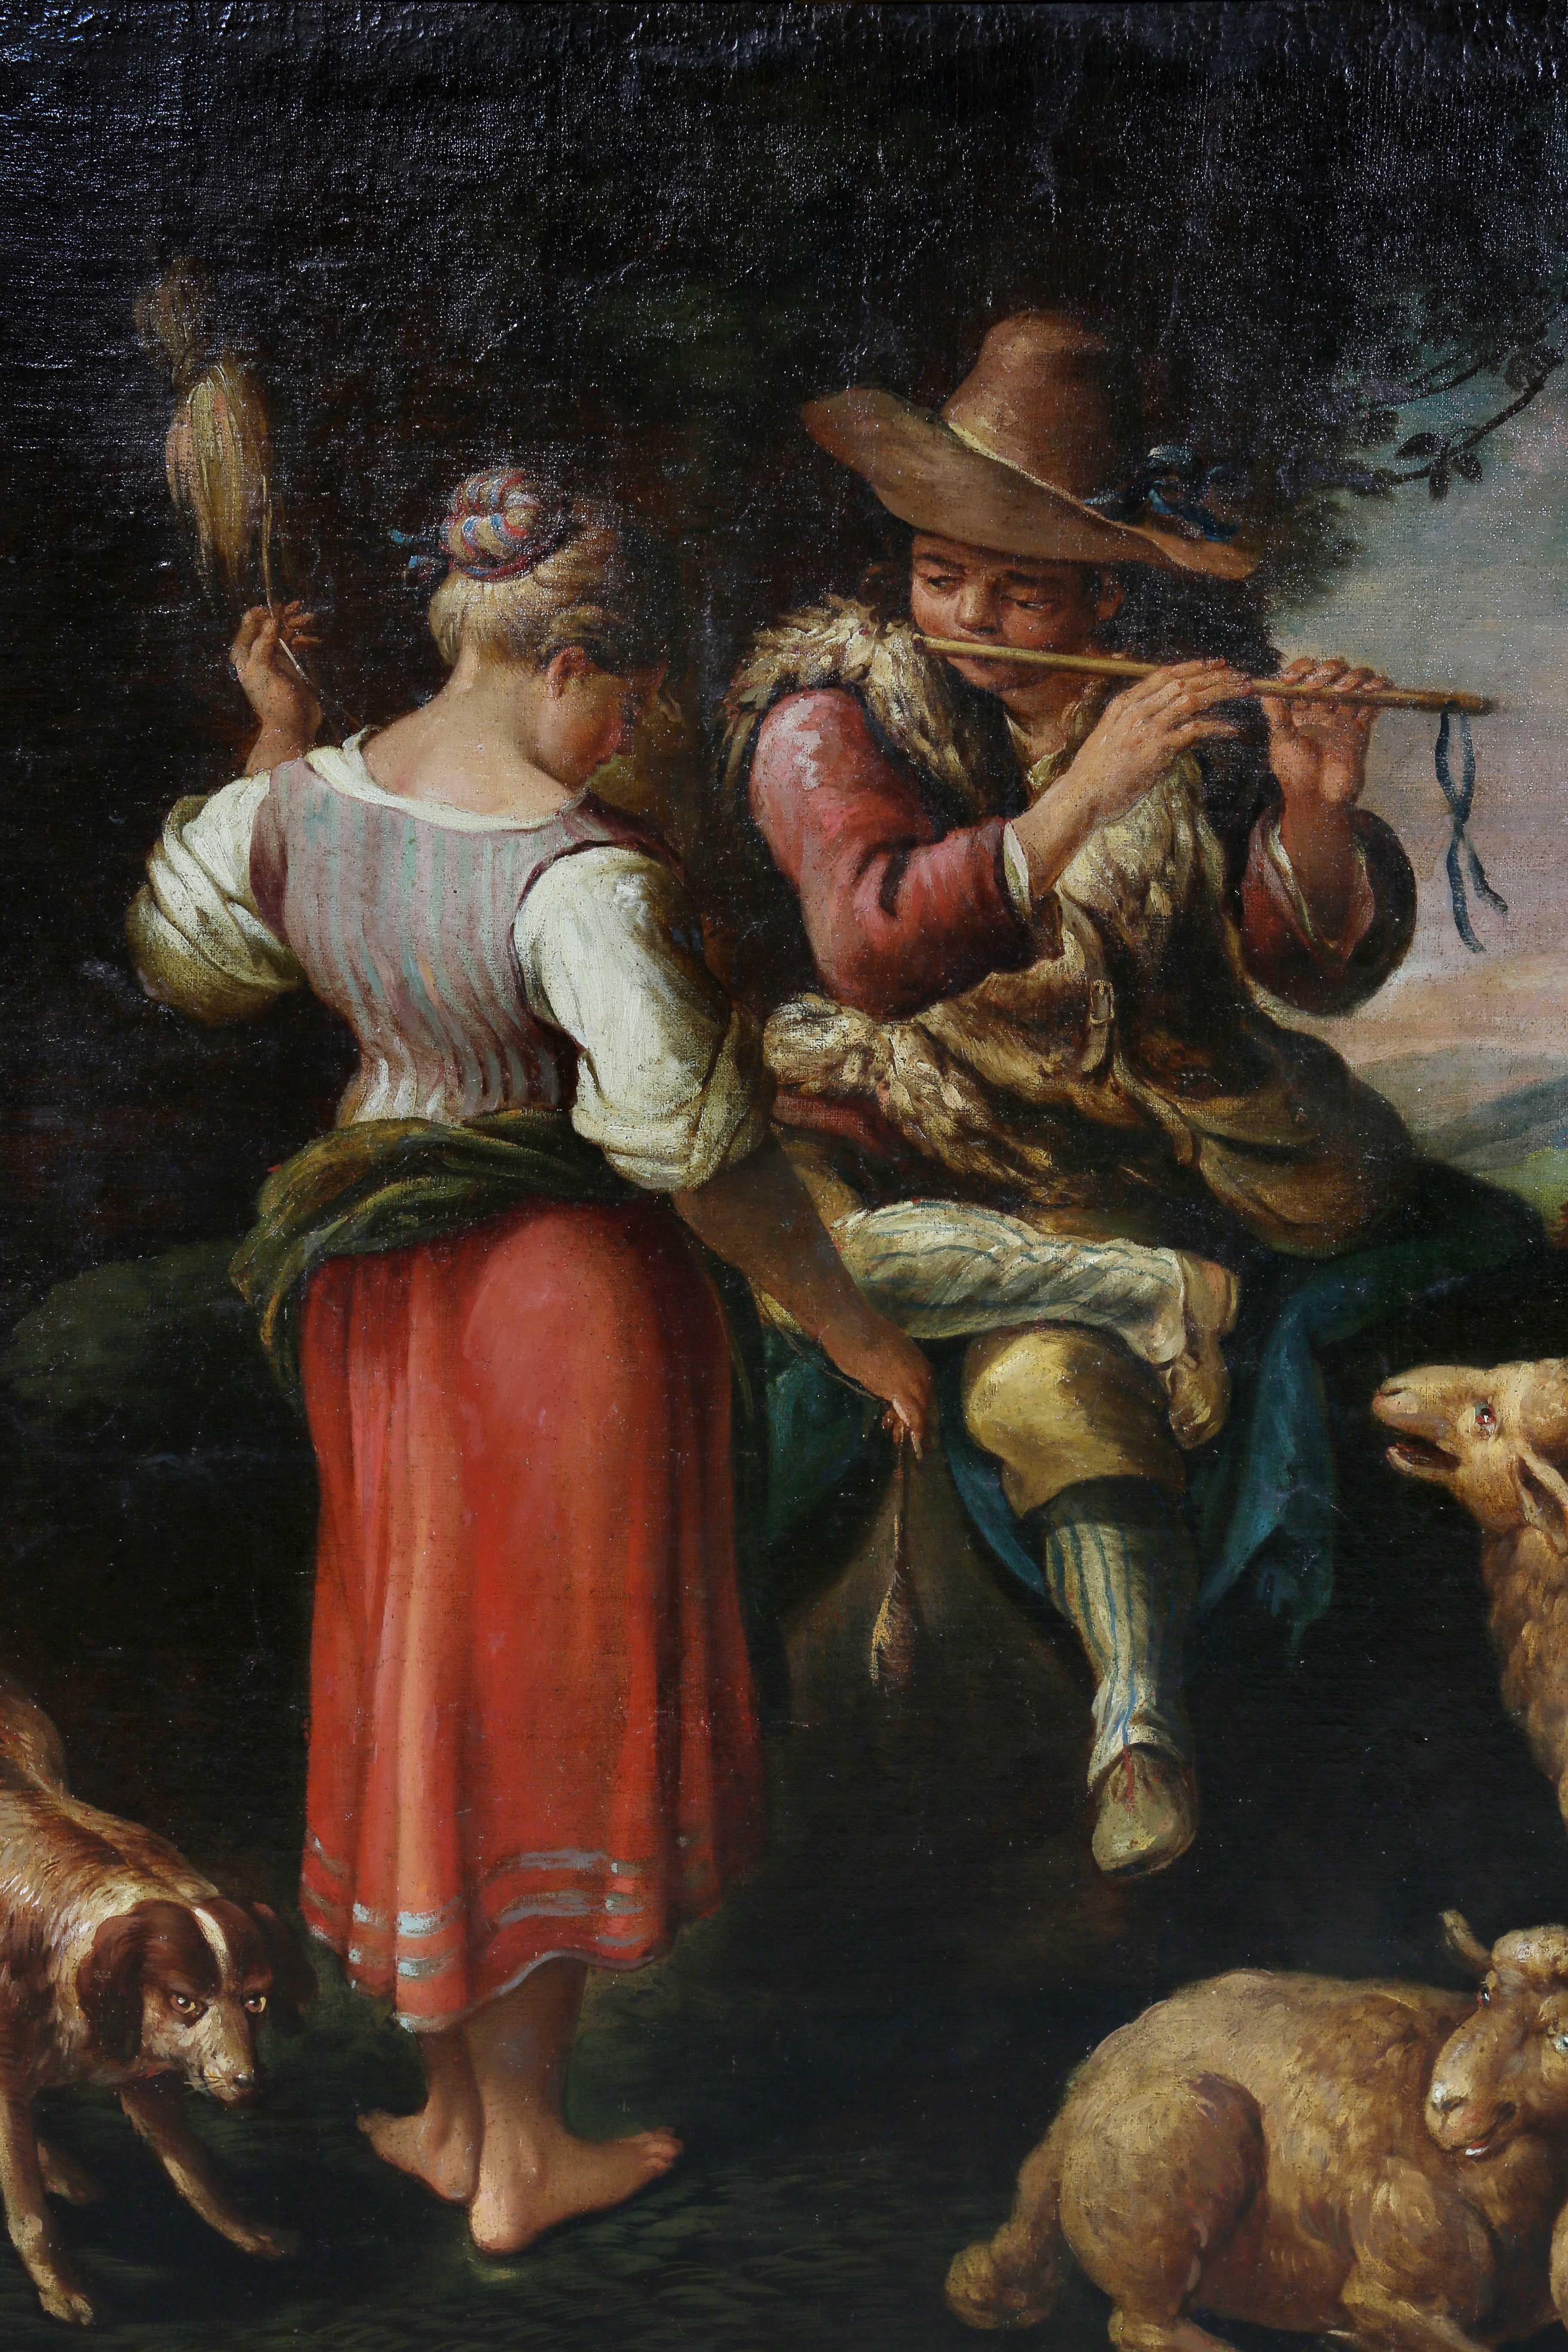 Relined on canvas with a man with a flute romancing a young woman in a landscape with a dog and various cows, sheep.